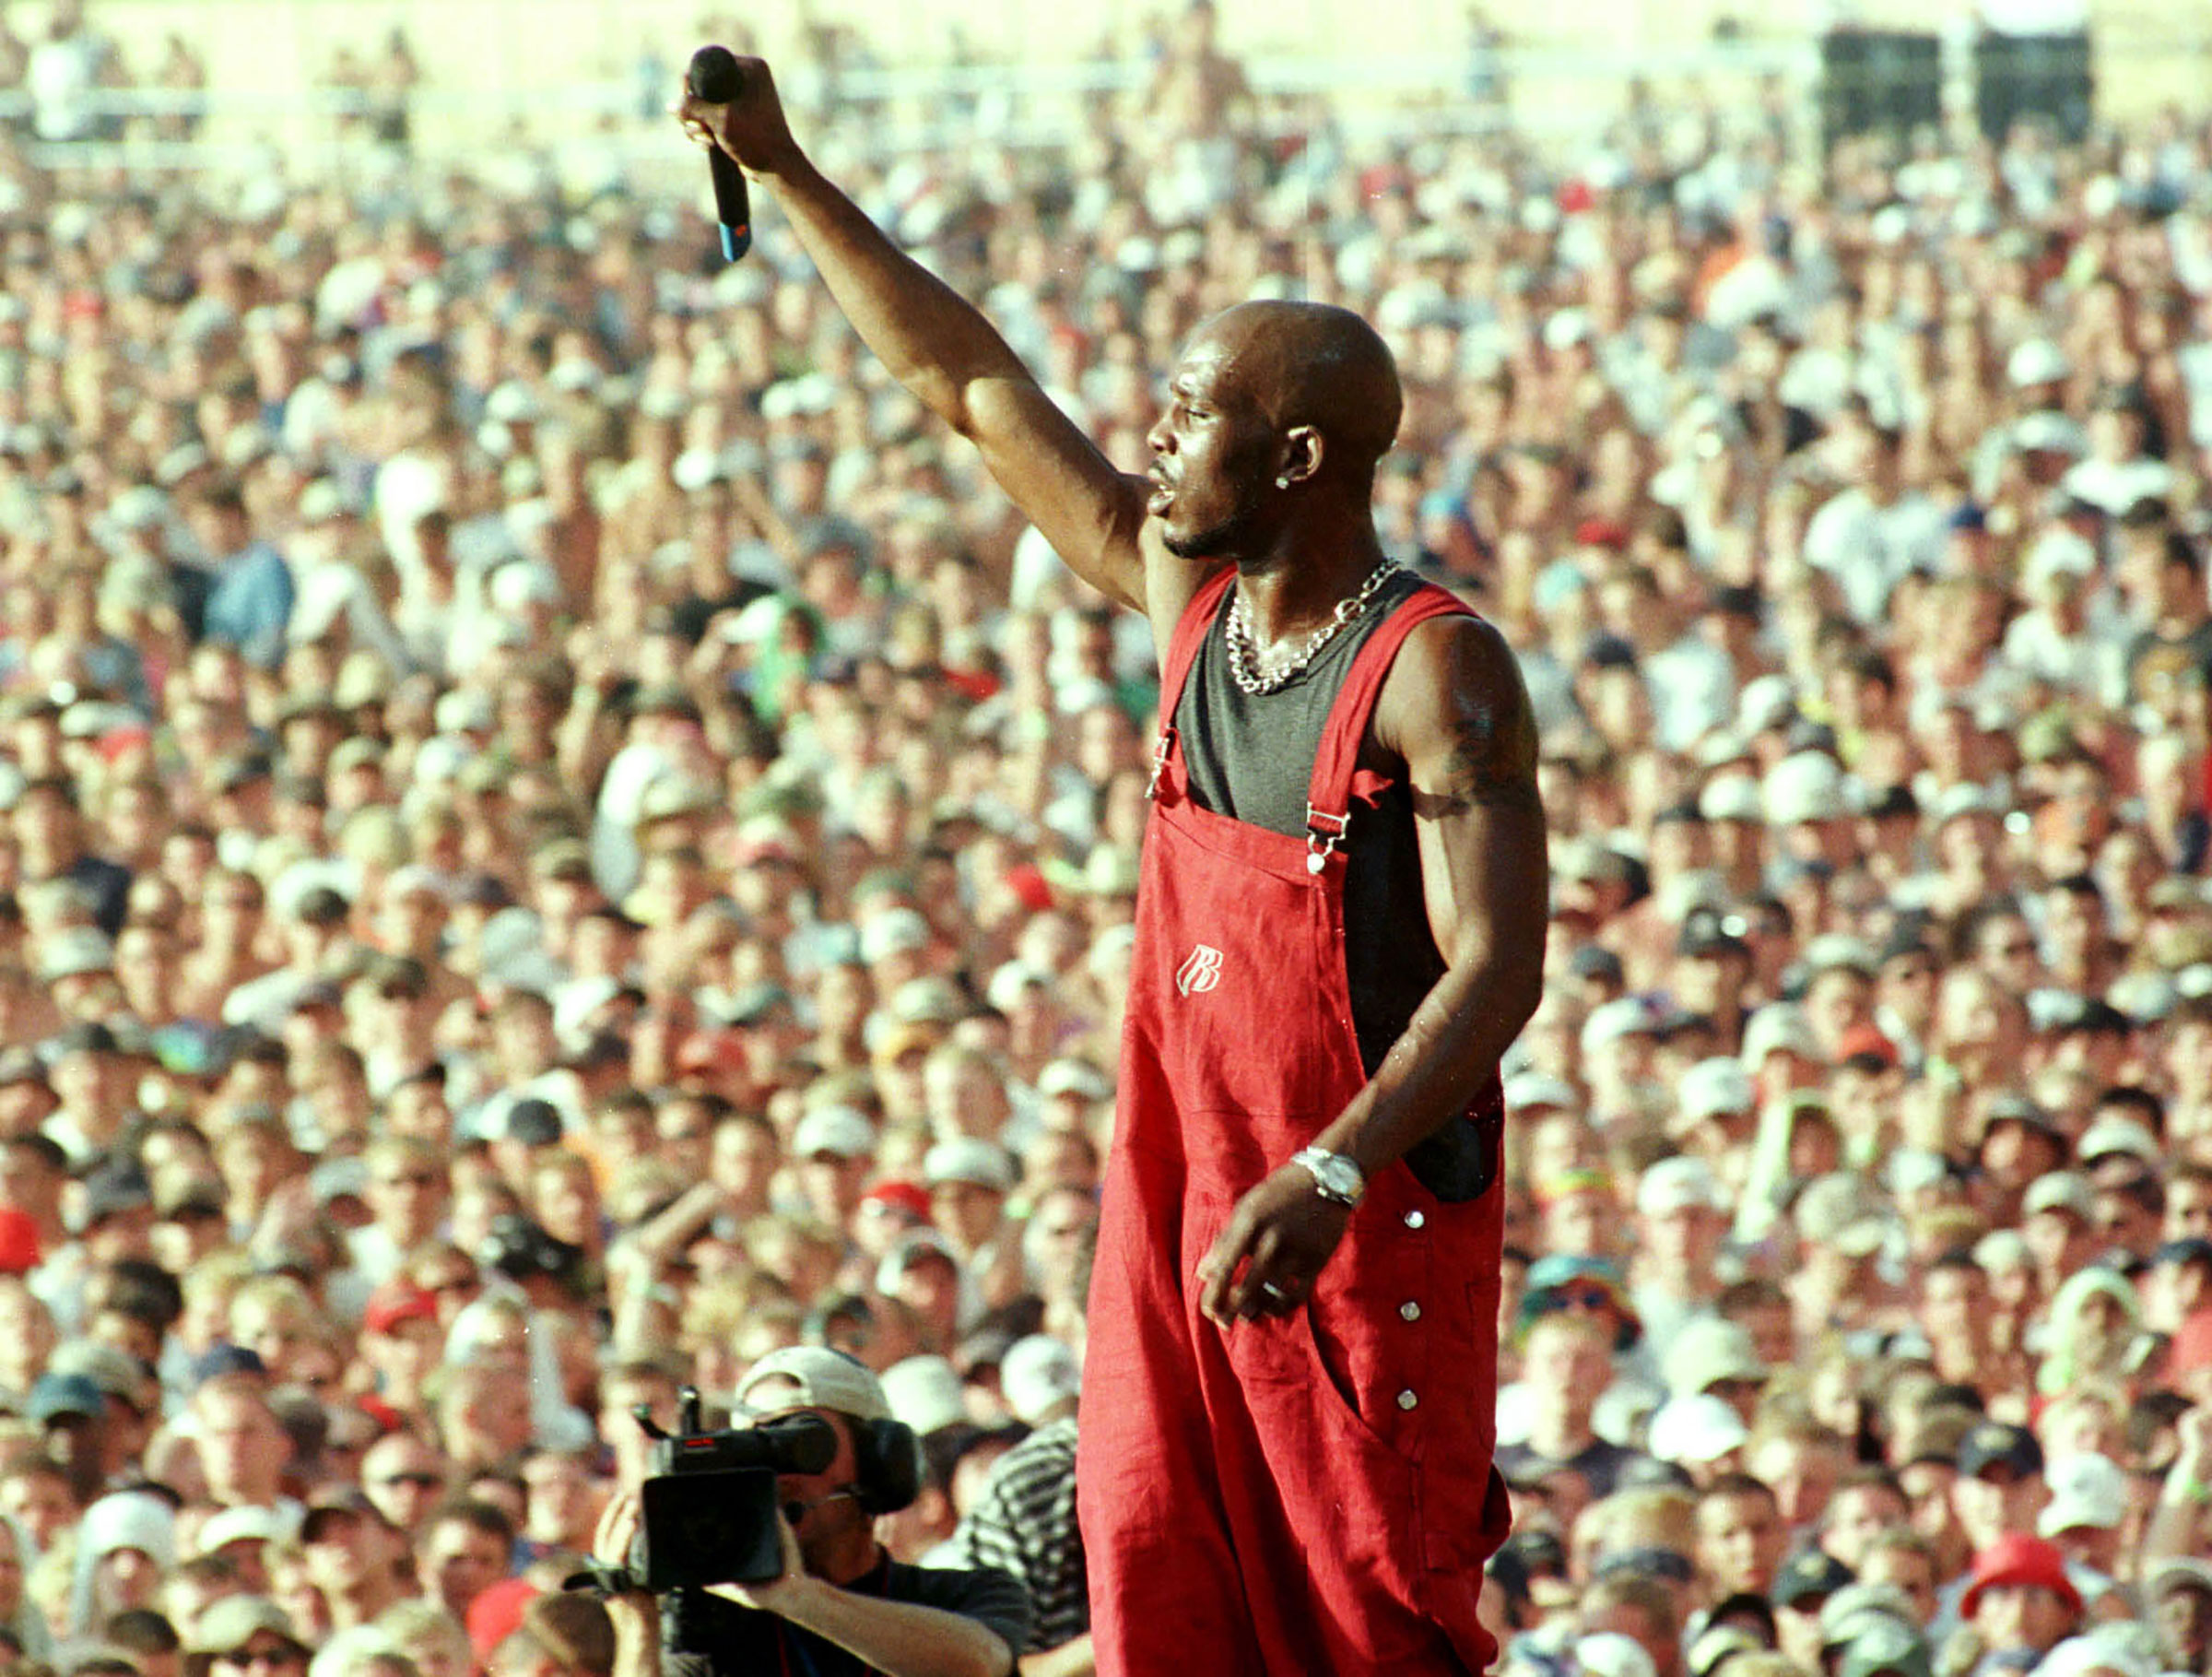 DMX performs on the main stage at the Woodstock music and arts festival in Rome, July 23, 1999. (Joe Traver—Redux)